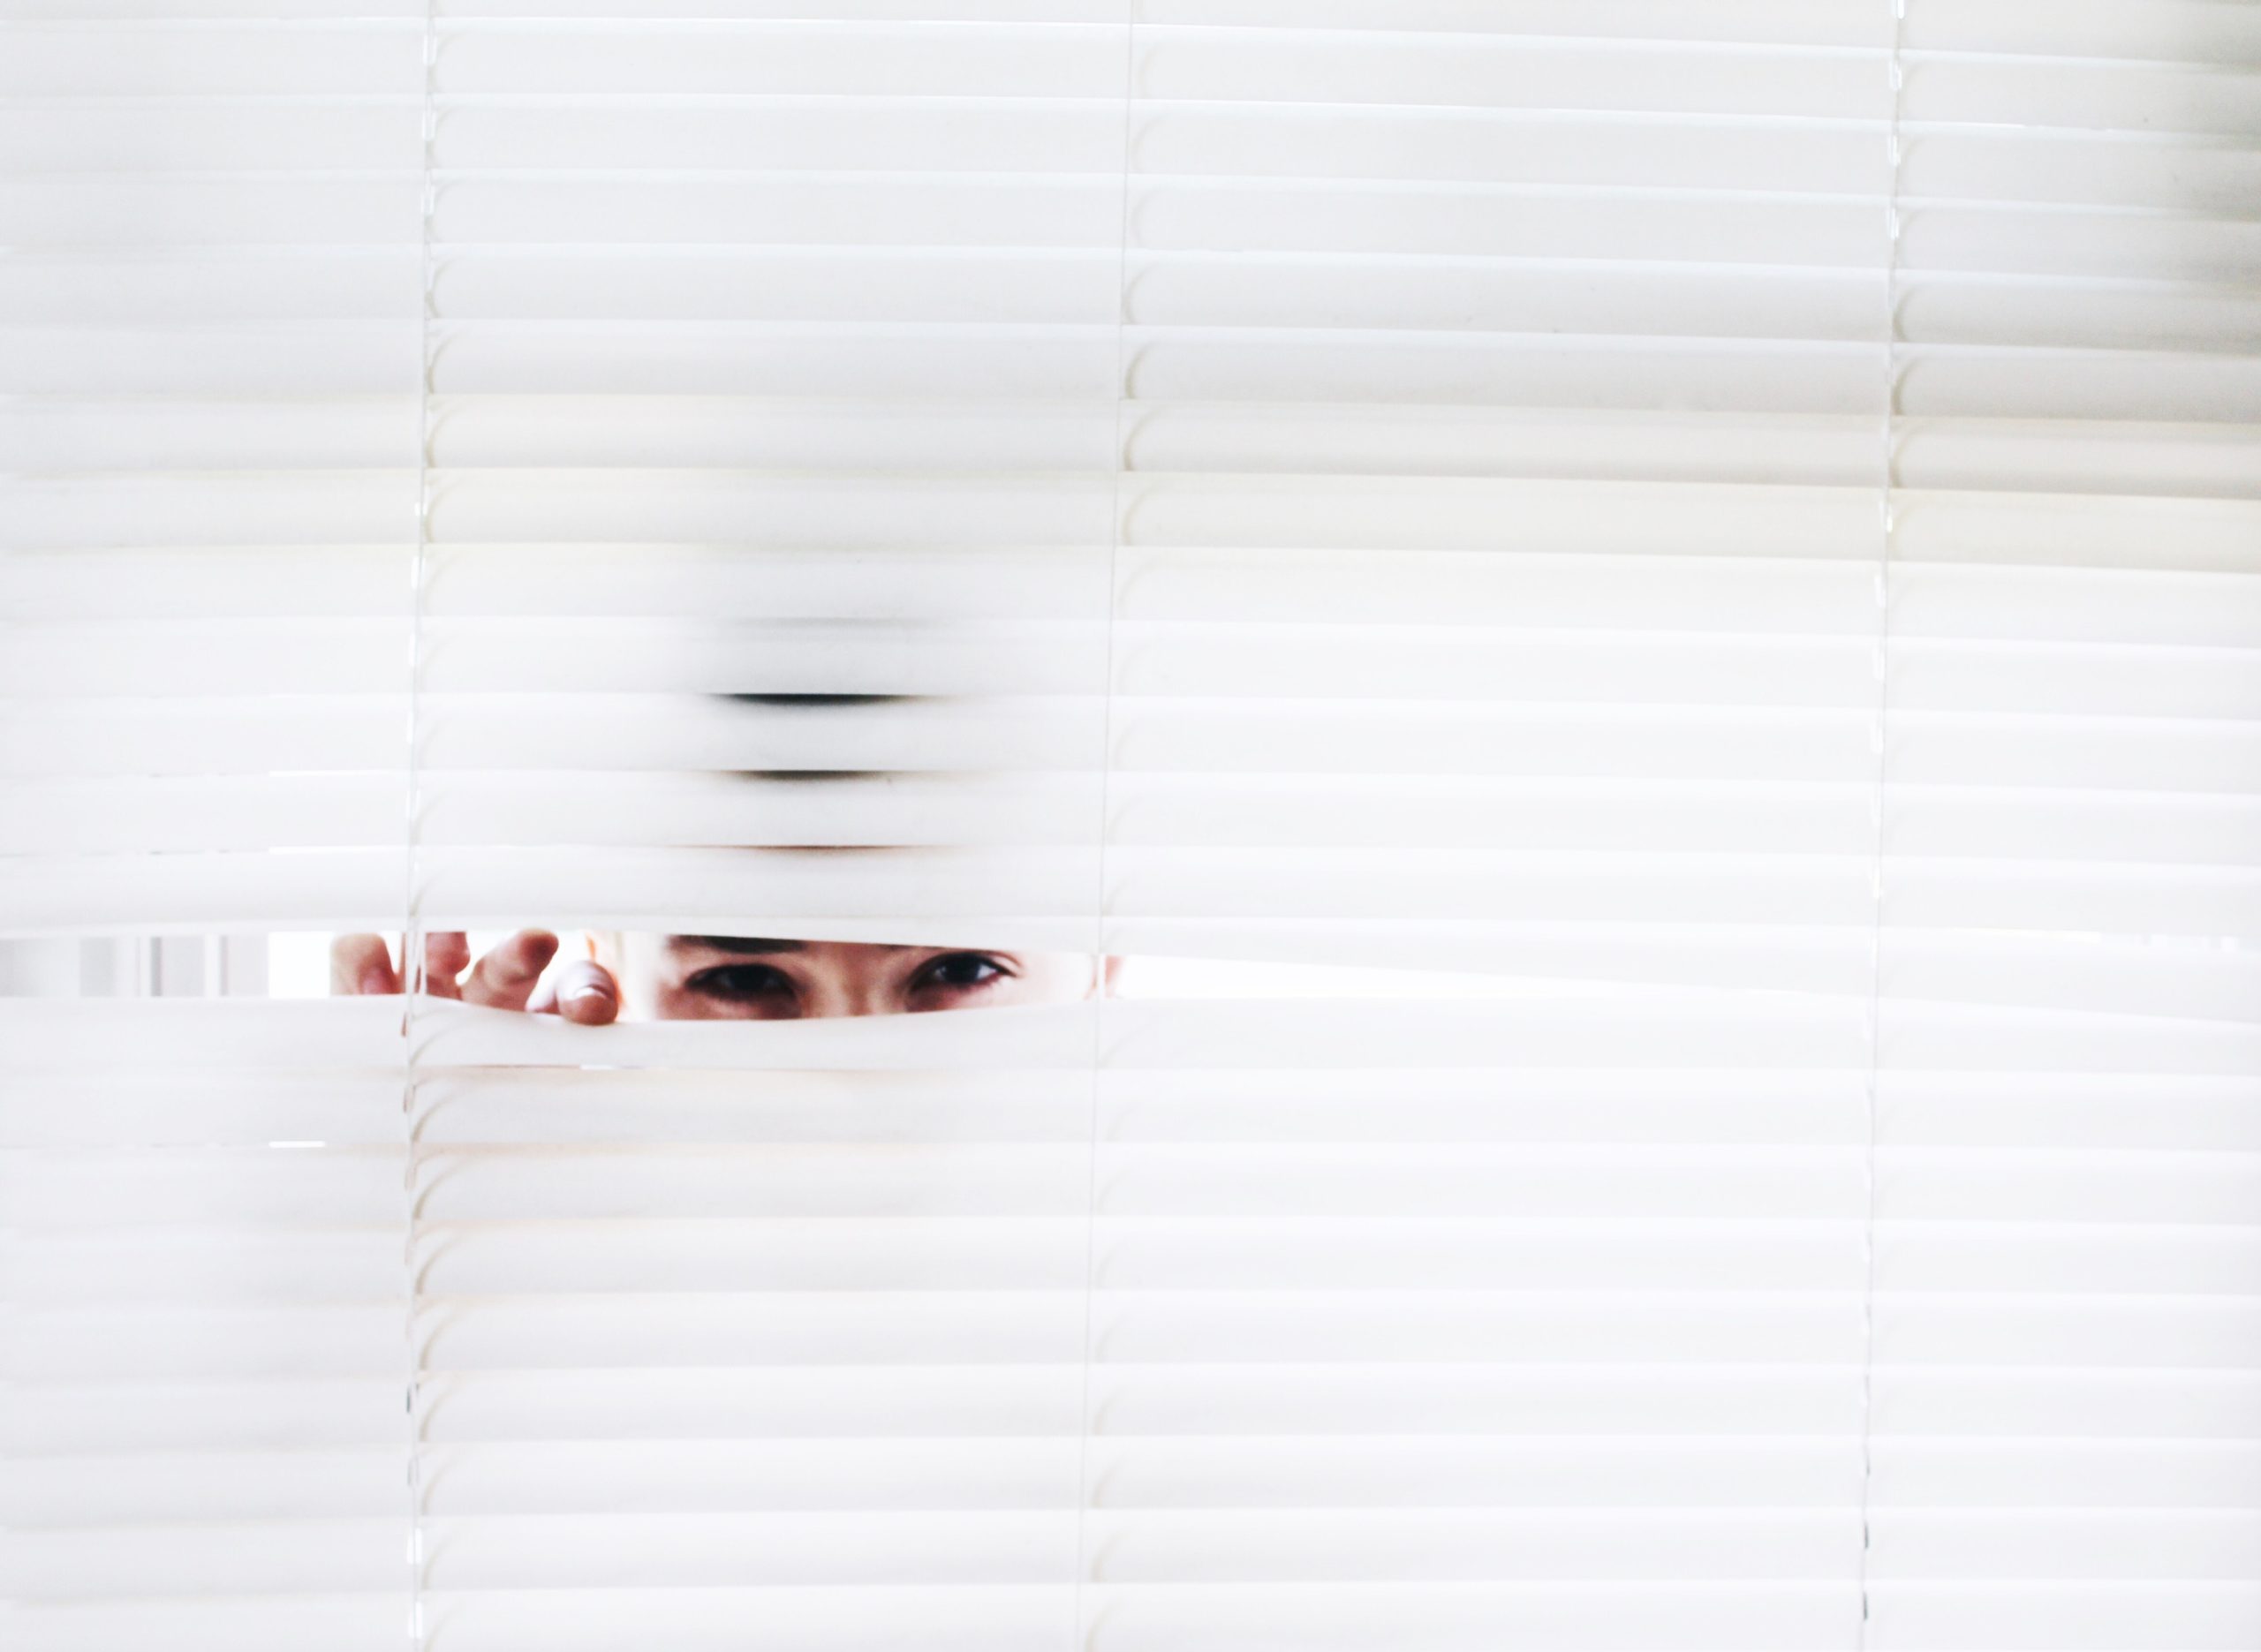 A person is hiding behind some window blinds.